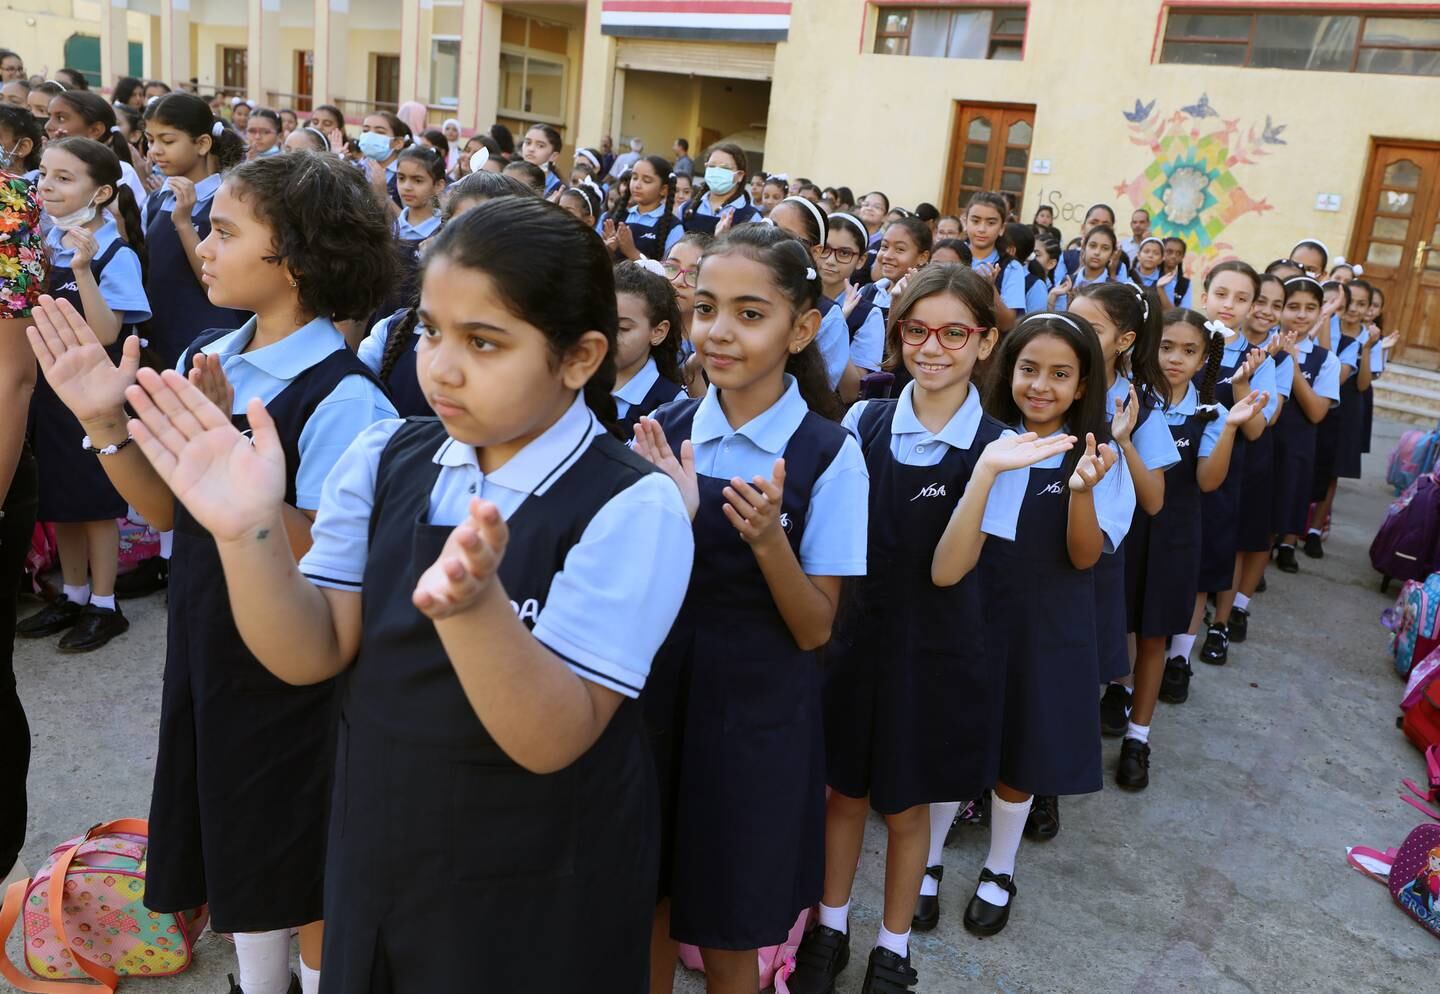 Schoolgirls during assembly at a private school in Cairo, Egypt. EPA